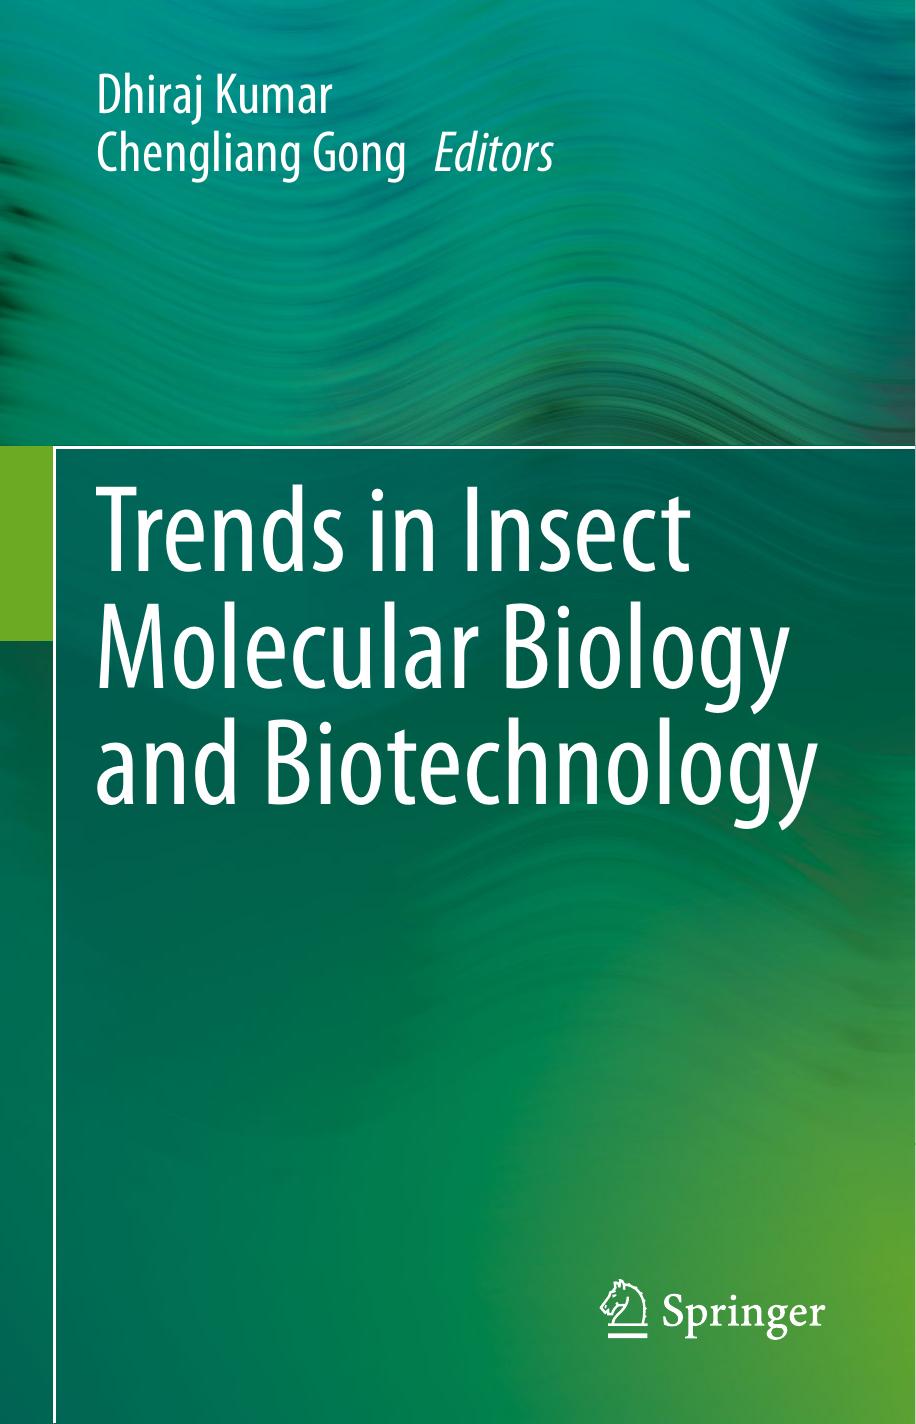 Trends in Insect Molecular Biology and Biotechnology 2018